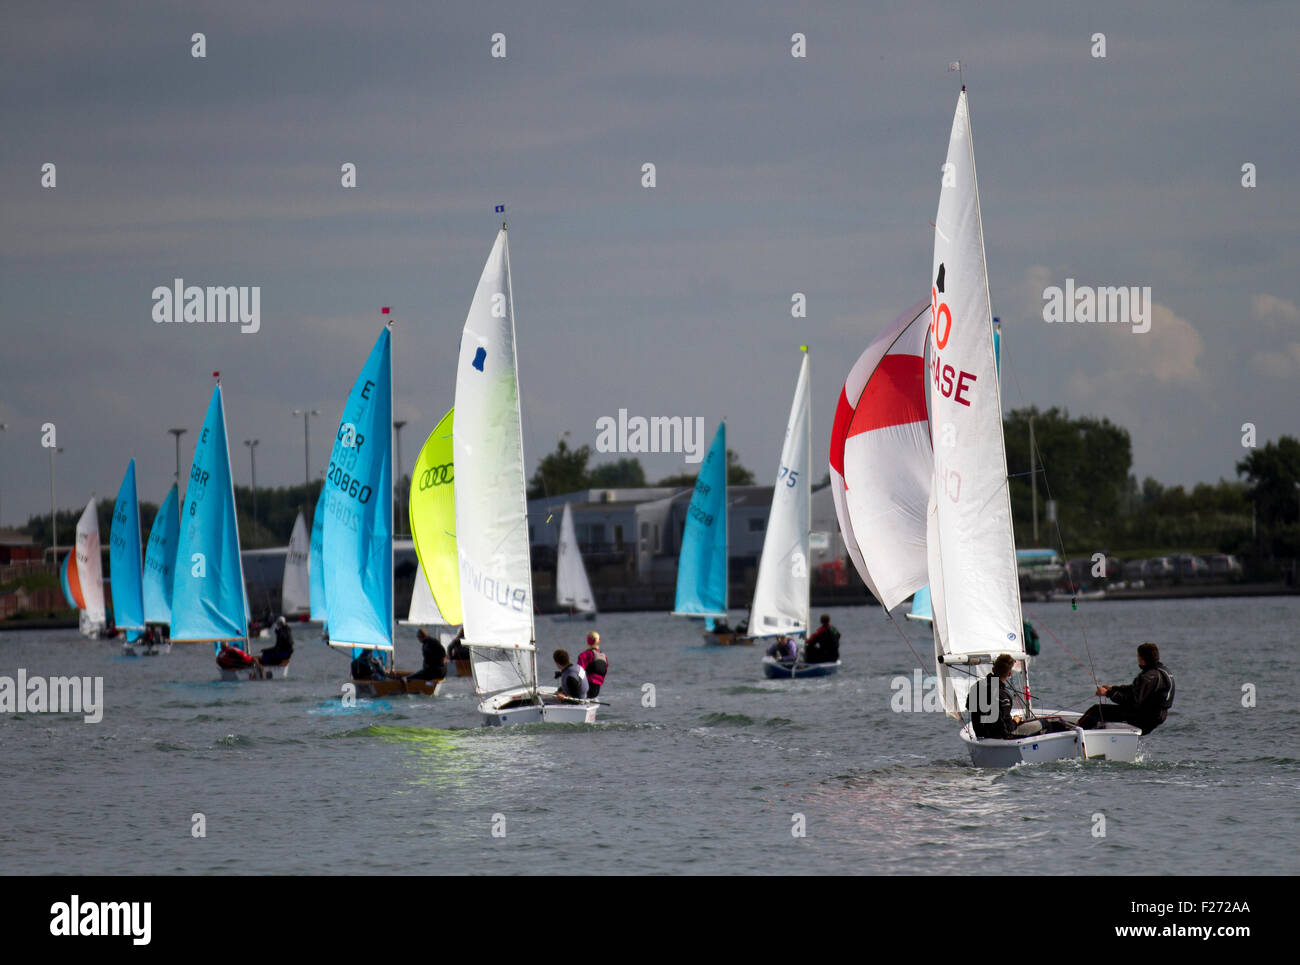 Southport, Merseyside, UK. 13th September, 2015. The Southport 24 Hour Race is a national sailing endurance race for two-handed sailing dinghies, with 63 Firefly, Lark, Enterprise and GP 14 boats competing. The race, hosted by the West Lancs Yacht Club, has a long history and is usually held in September. The race starts at 12 noon on the Saturday. The contestants then race their dinghies around the marine lake finishing at noon today.  During the hours of darkness, the helm and crew of each dinghy must keep a careful watch for other boats (often capsized).  Credit:  Mar Photographics/Alamy Li Stock Photo